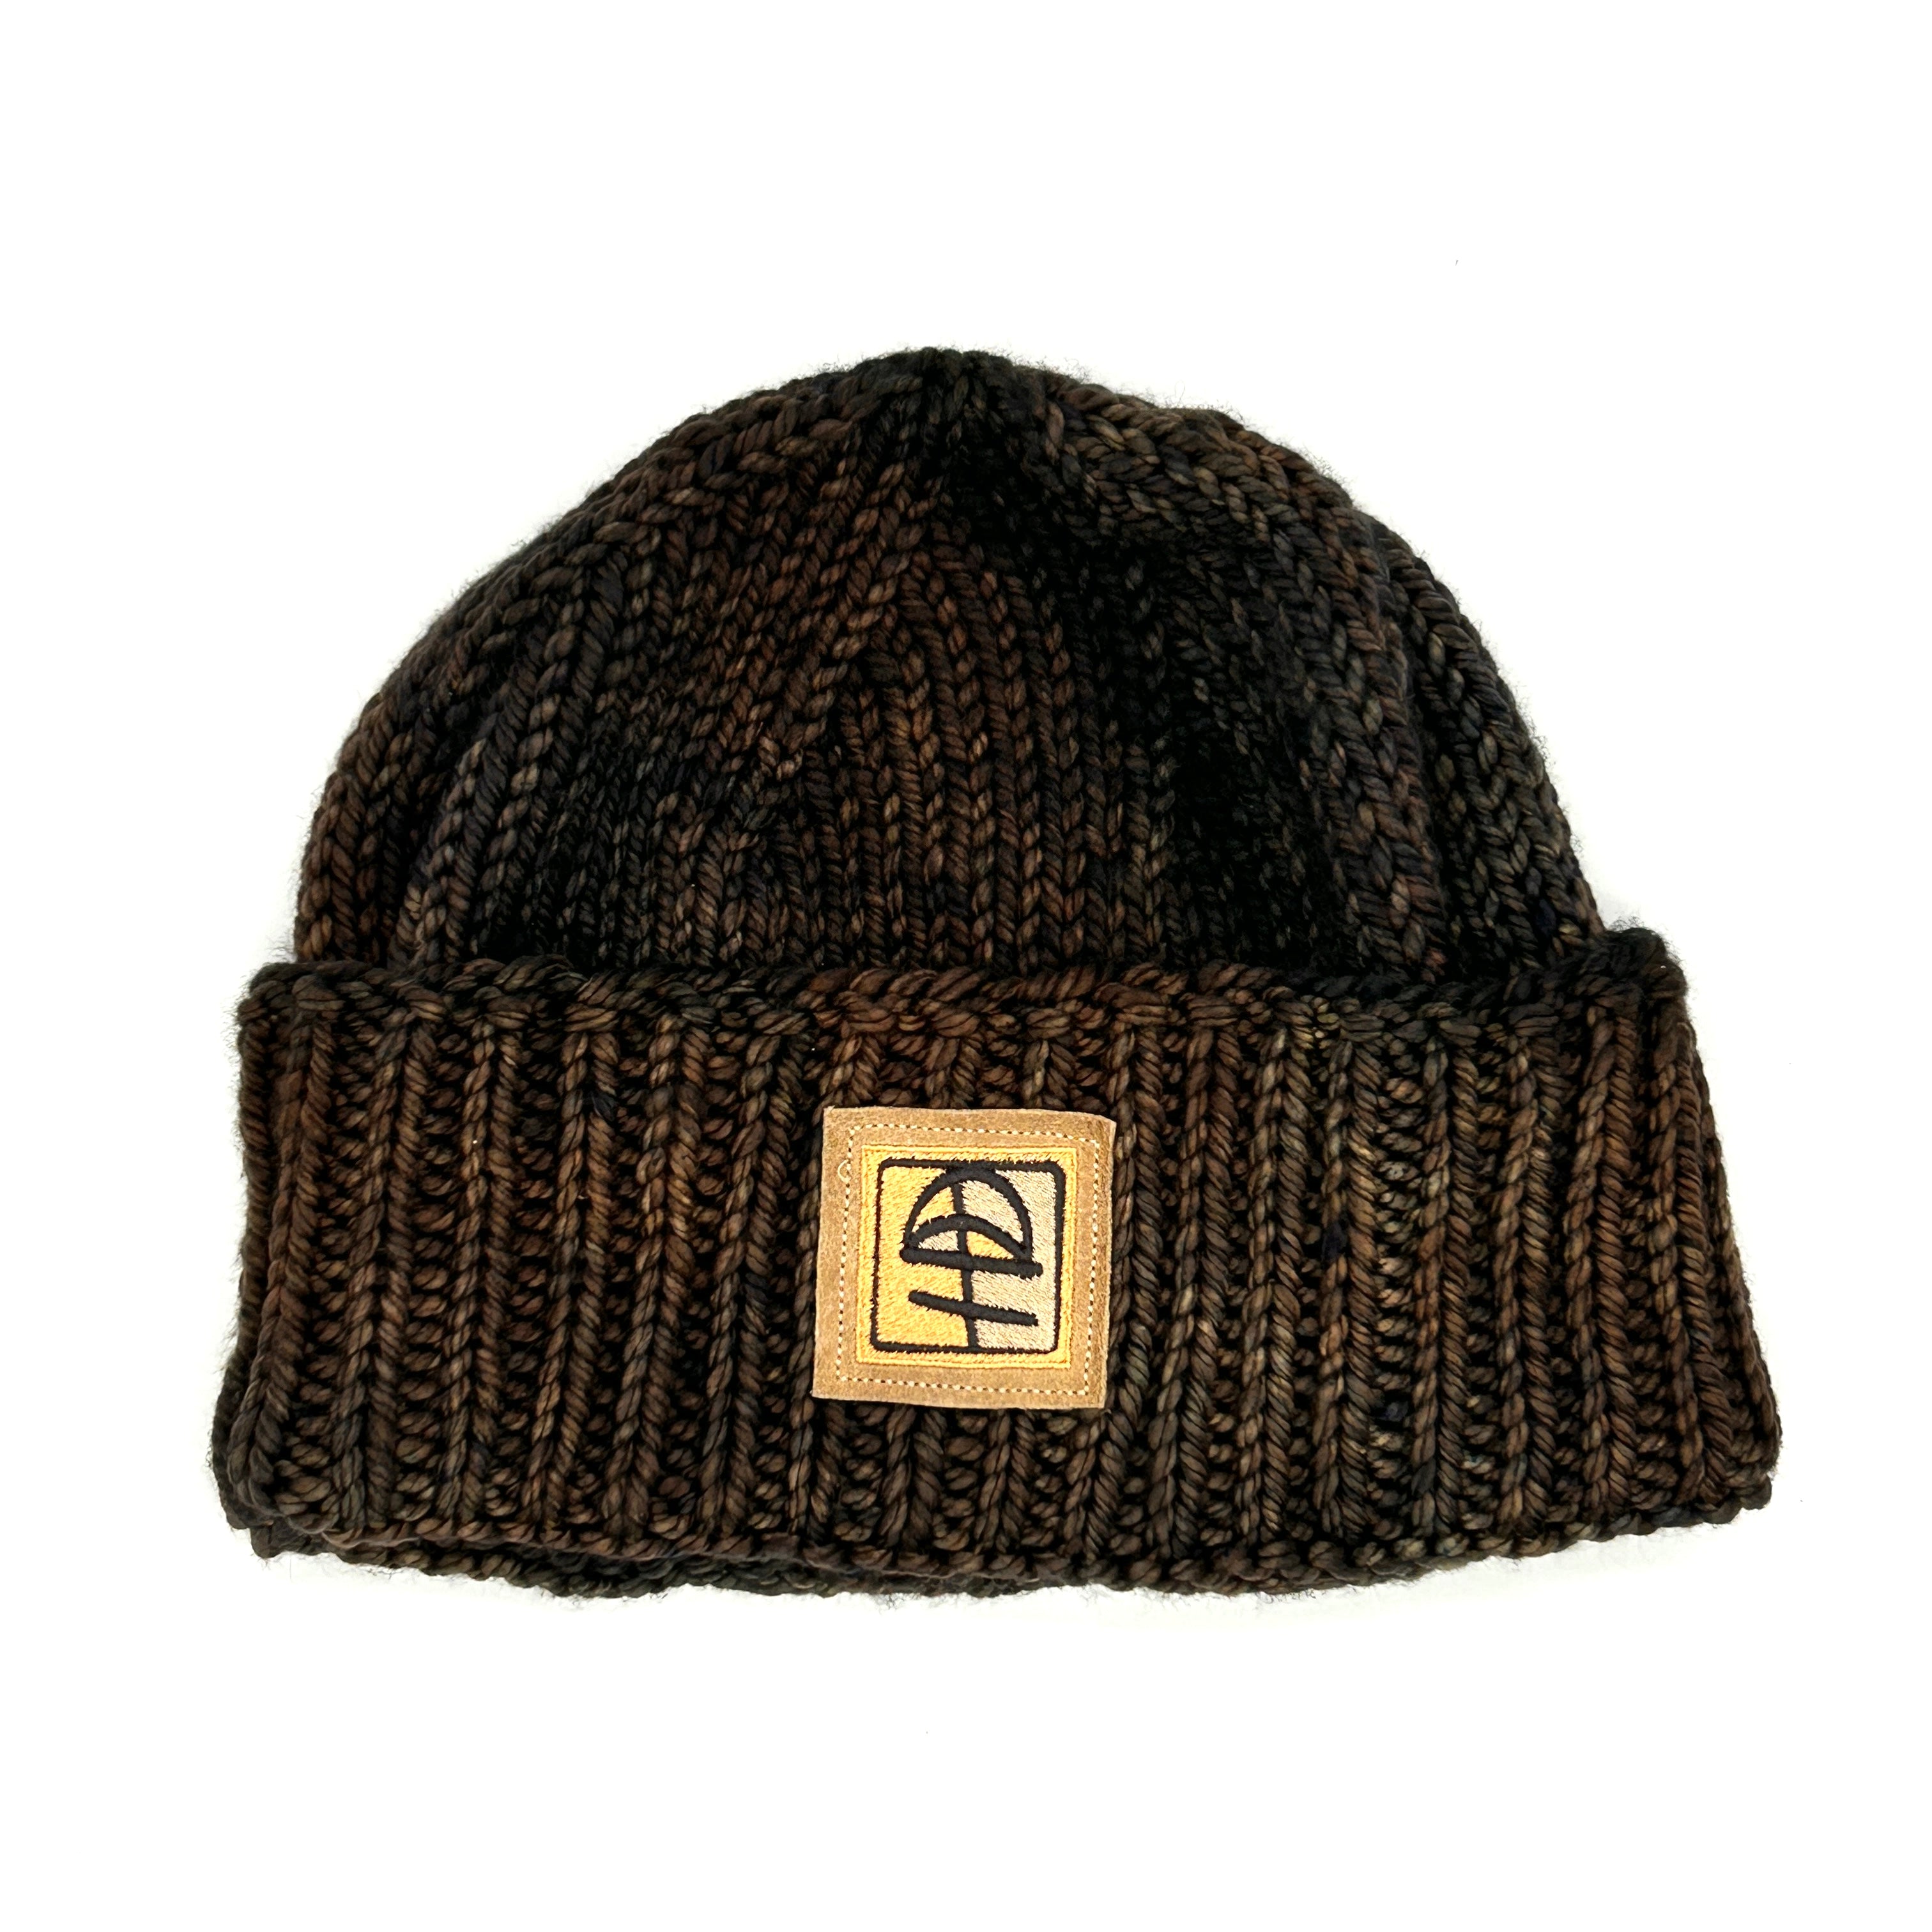 Hats-BIG ASS BEANIE - Cocoa-WOOLTRIBE